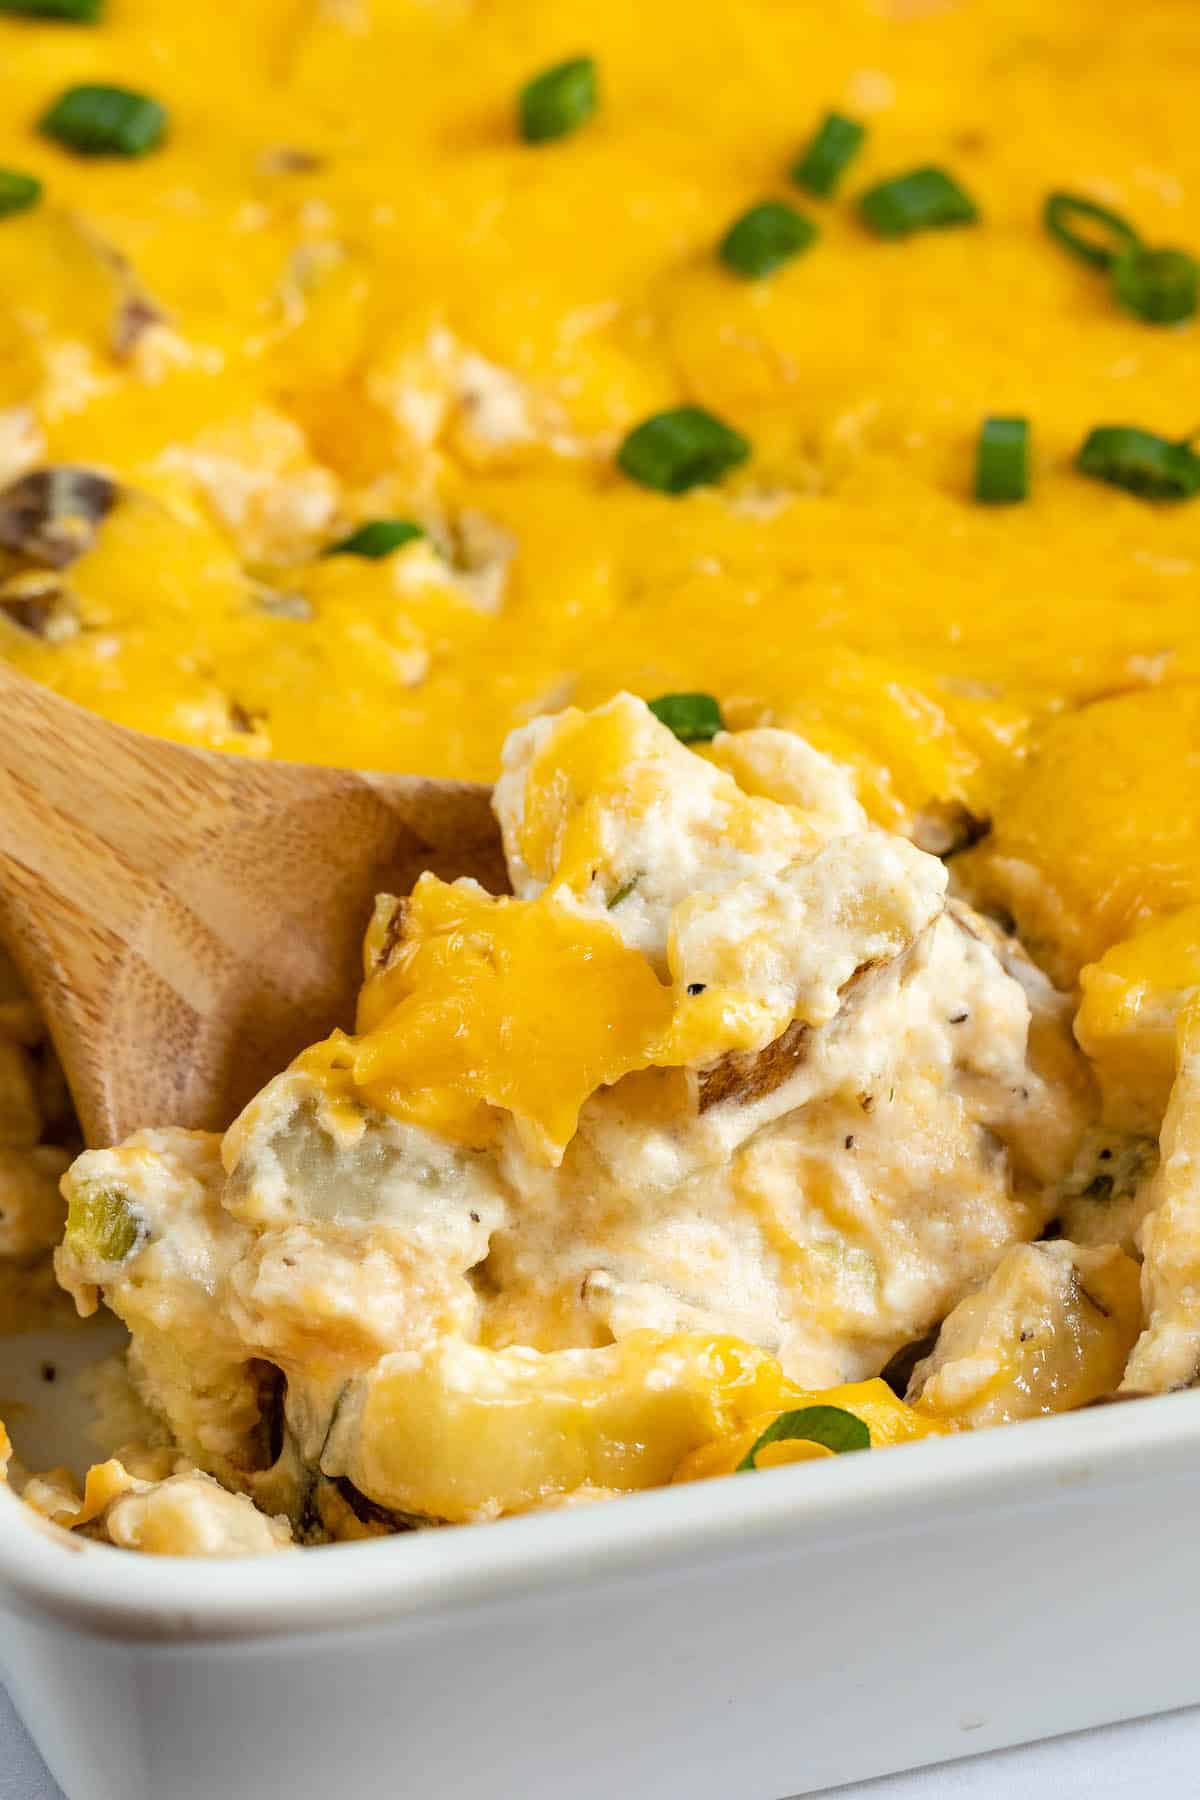 30 Easy Bake-And-Take Casseroles Perfect For Summer